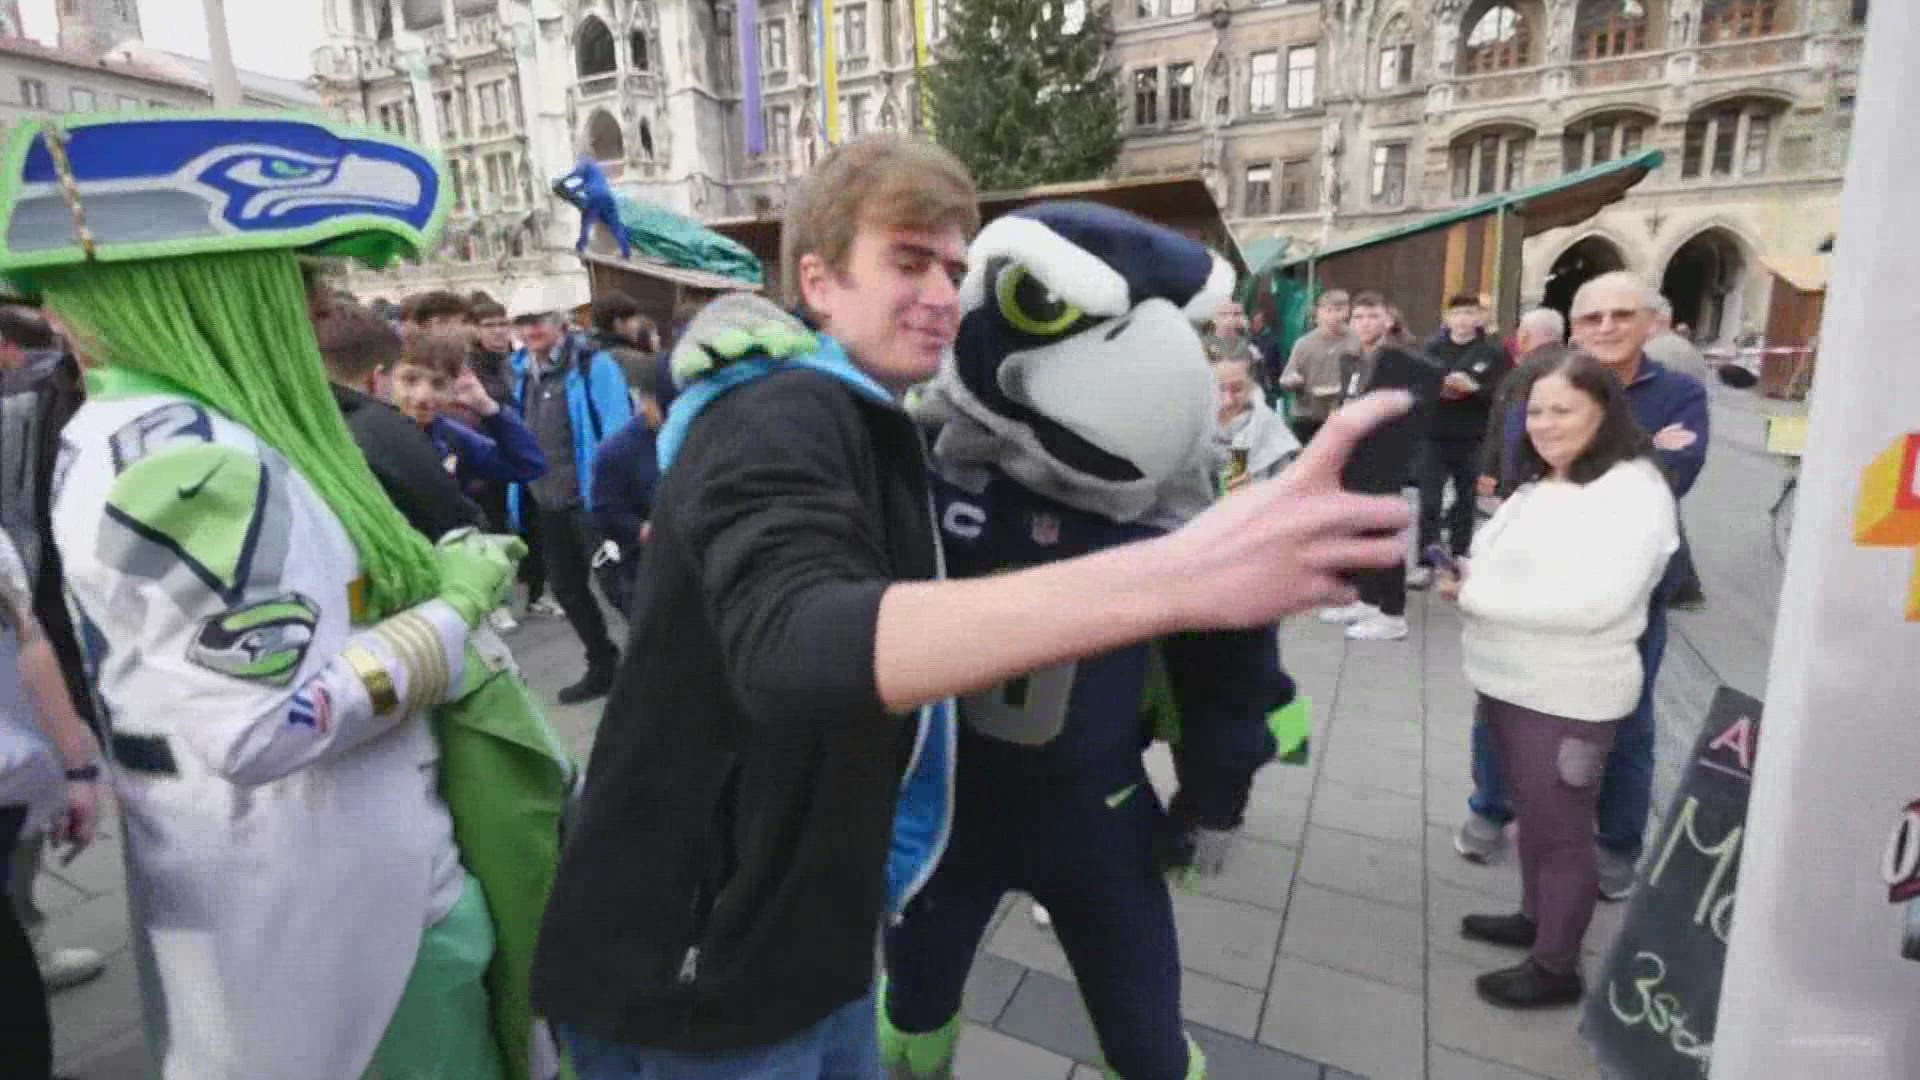 Rick Steves prepares Seattle Seahawks followers for journey to Germany